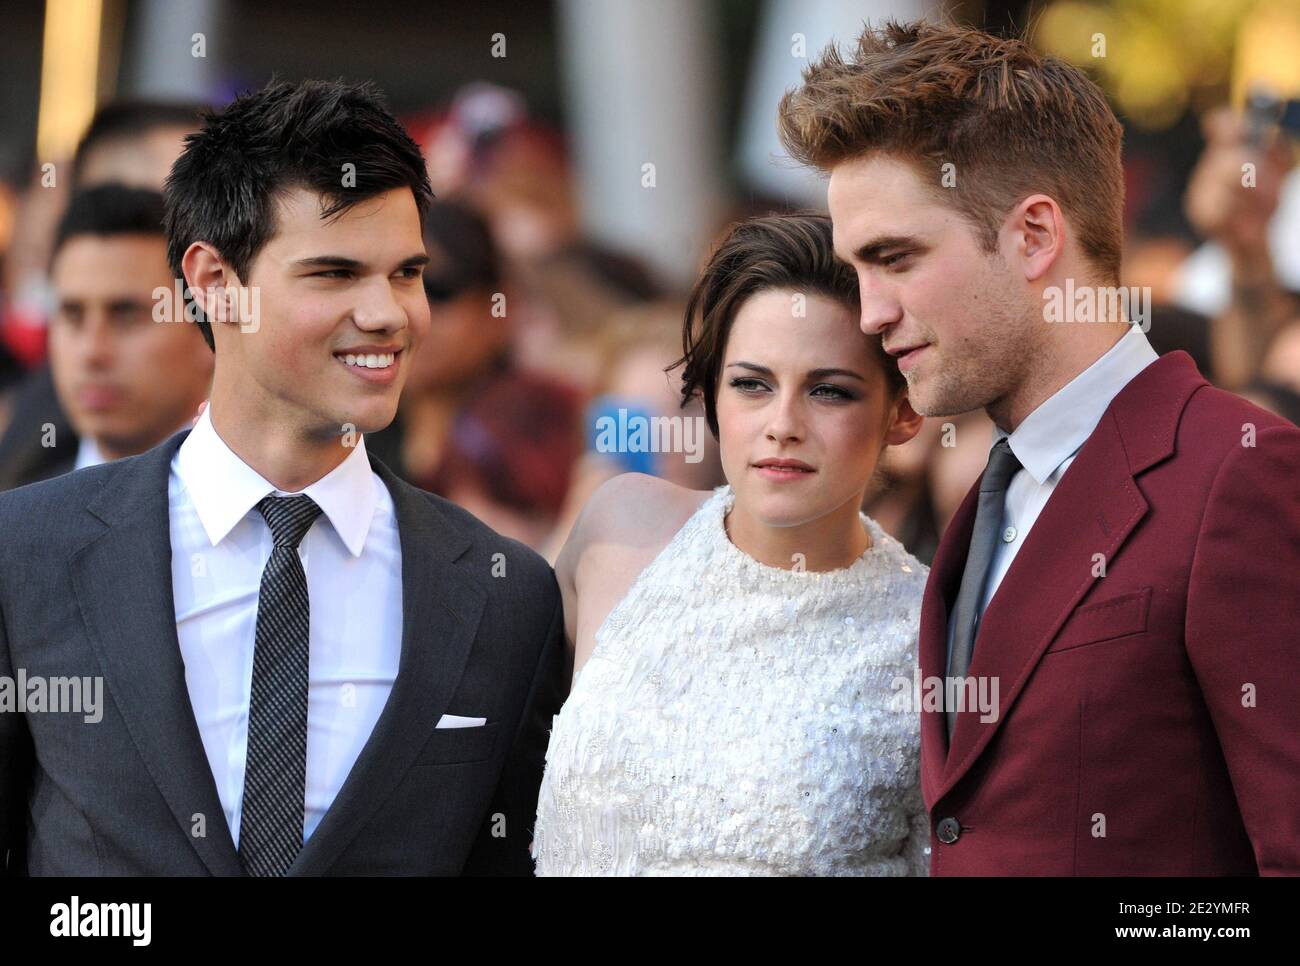 'Robert Pattinson, Kristen Stewart and Taylor Lautner attend the premiere of ''The Twilight Saga: Eclipse'' part of the 2010 Los Angeles Film Festival. Los Angeles, June 24, 2010. (Pictured : Robert Pattinson, Kristen Stewart, Taylor Lautner). Photo by Lionel Hahn/ABACAPRESS.COM' Stock Photo